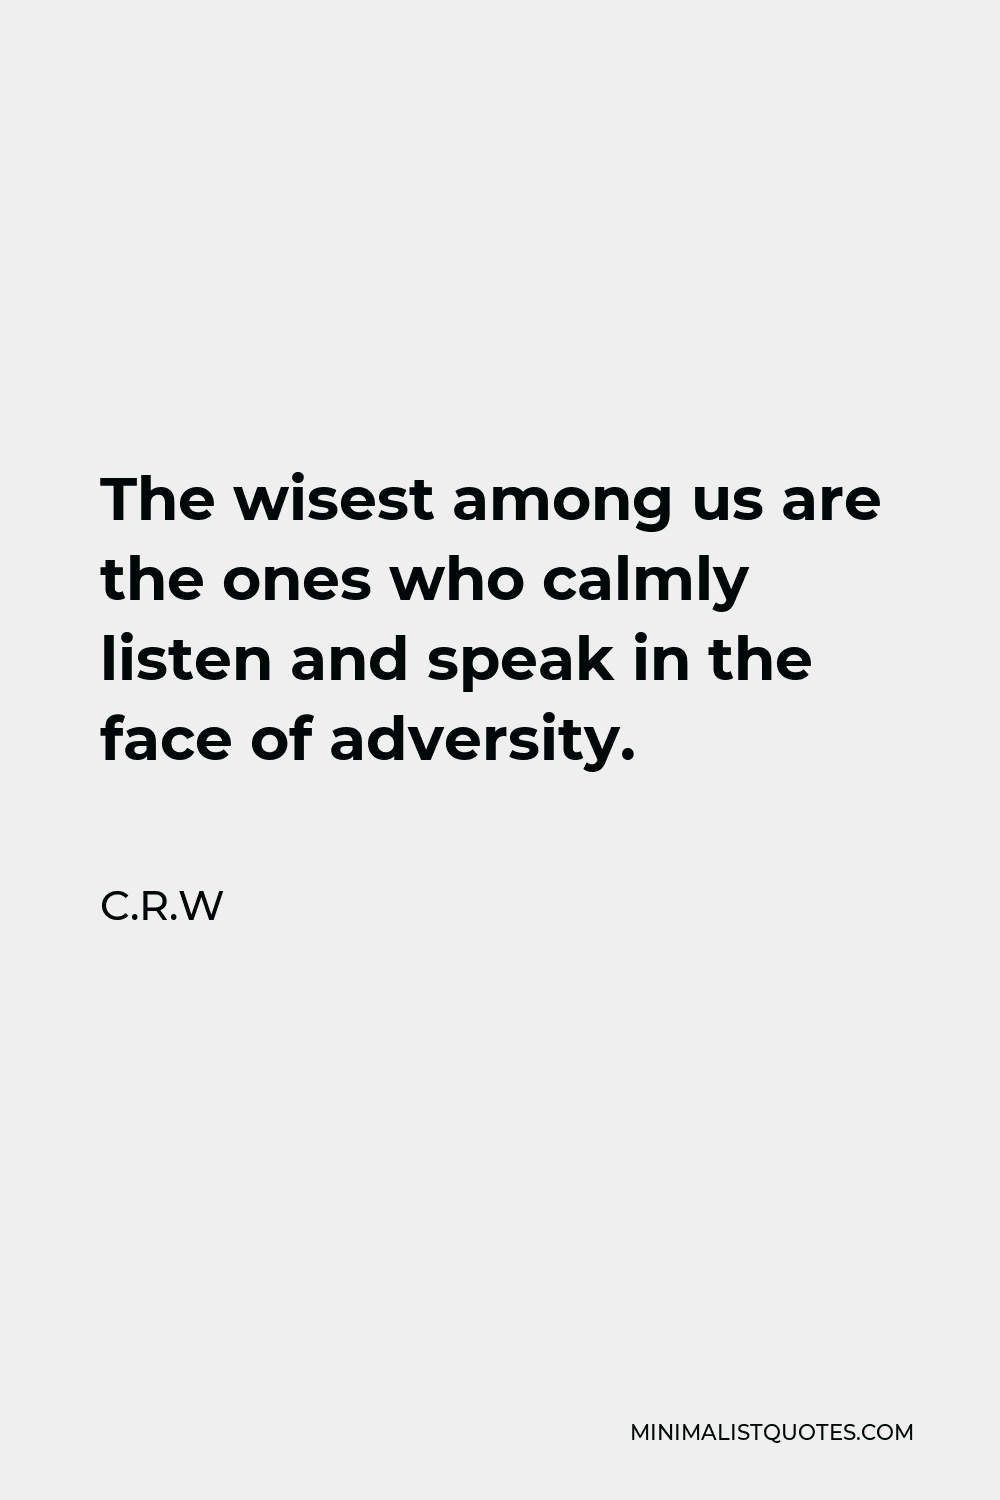 C.R.W Quote - The wisest among us are the ones who calmly listen and speak in the face of adversity.